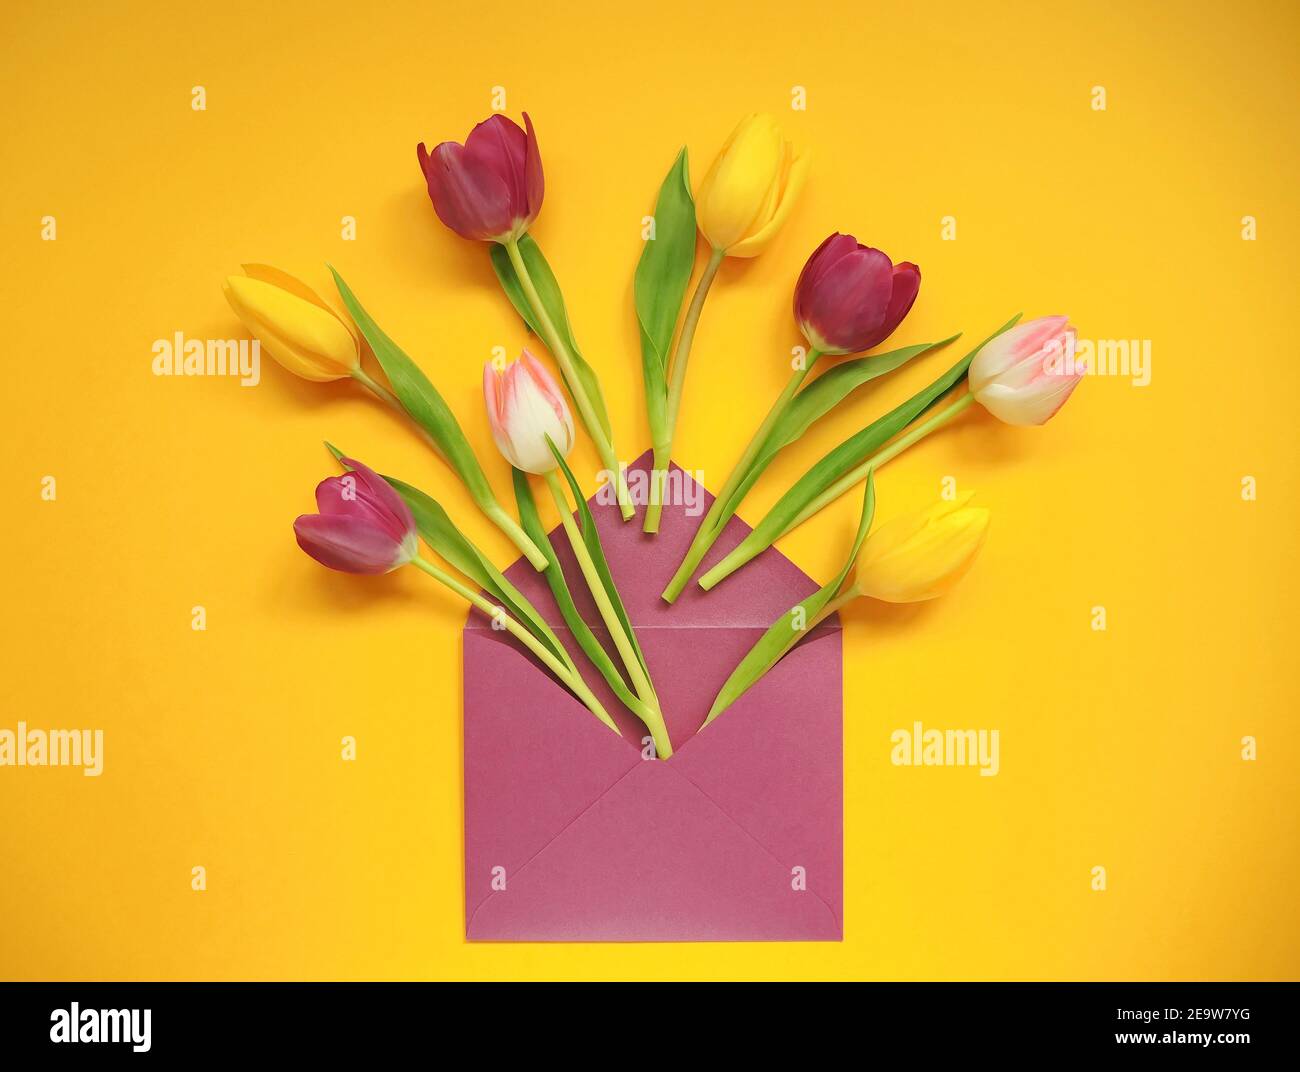 Bouquet of multicolored tulips. Bright spring background. Stock Photo